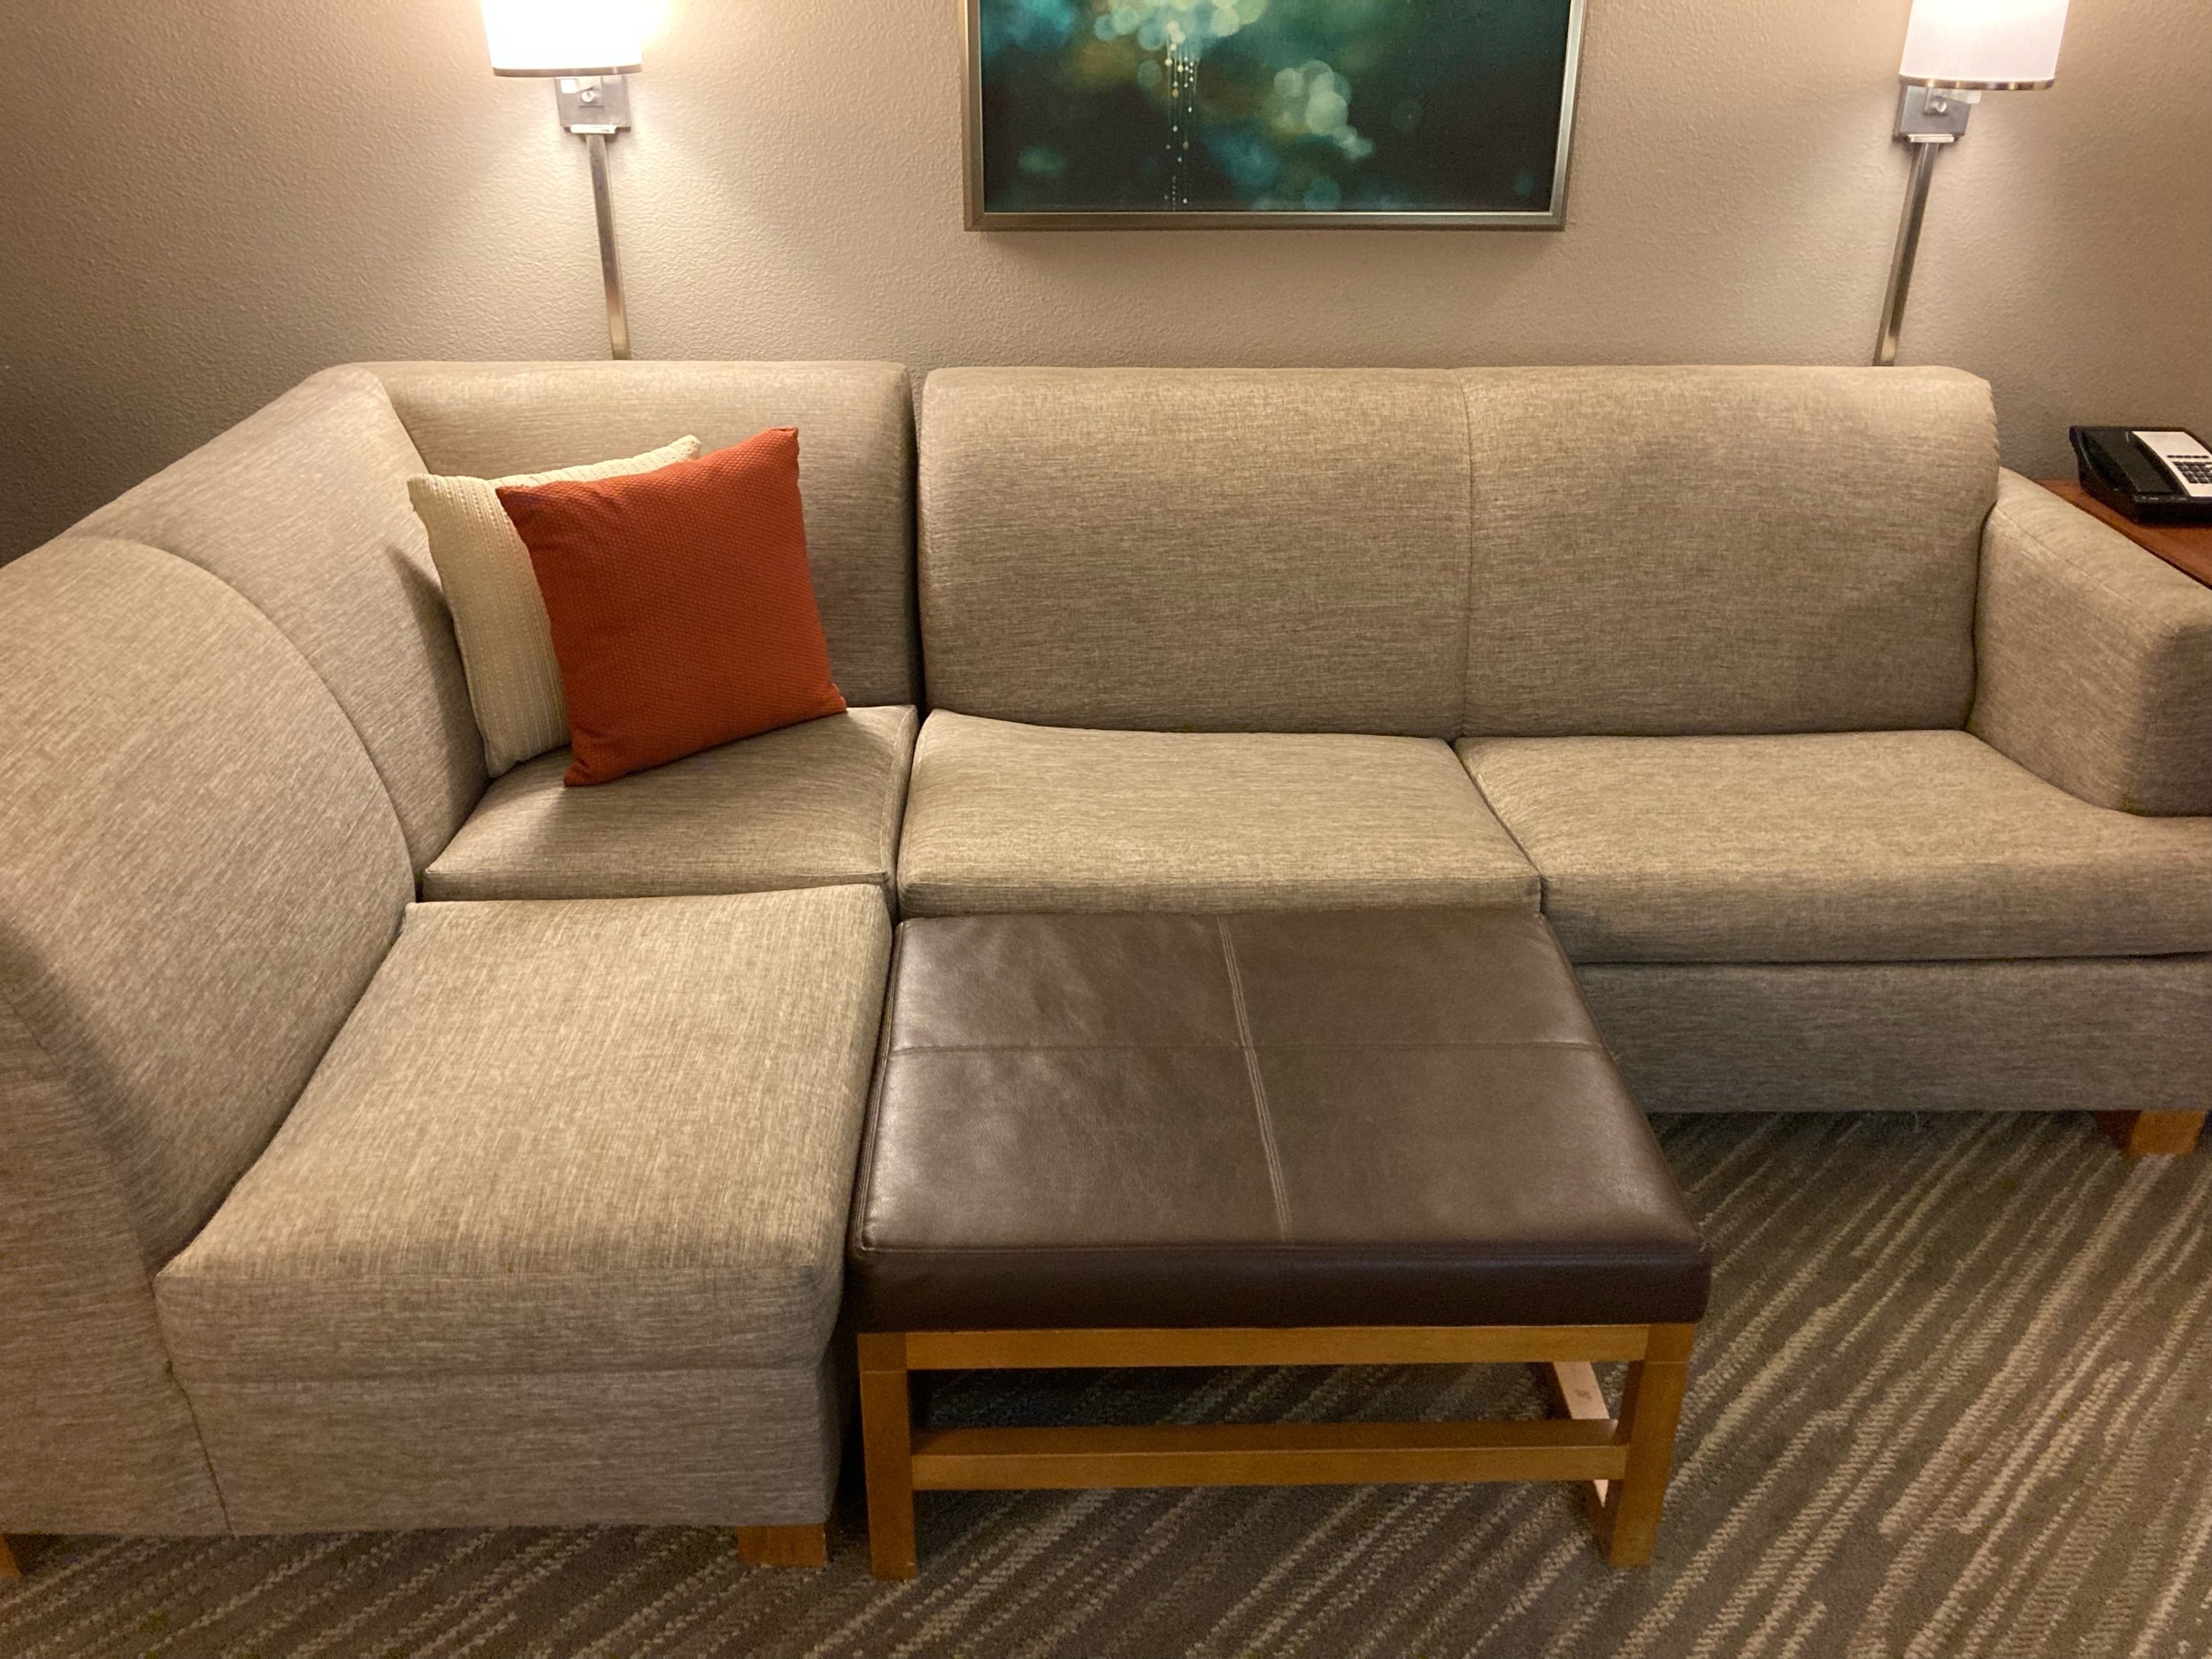 Multi-seater couch